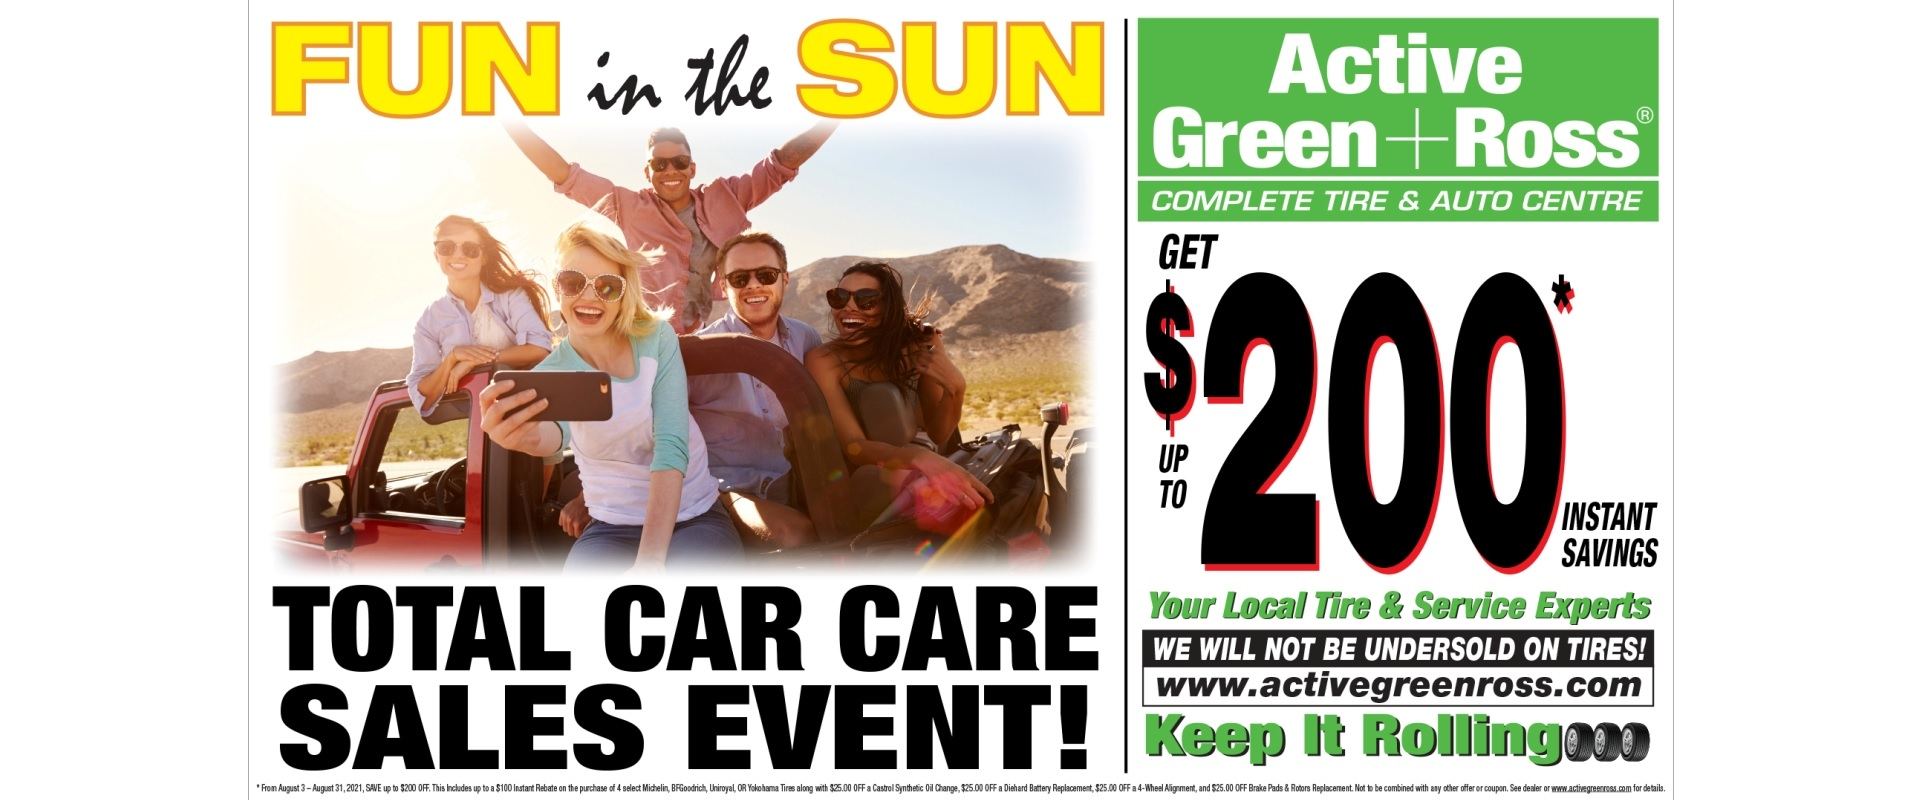 Active Green Ross Complete Tire Auto Centre